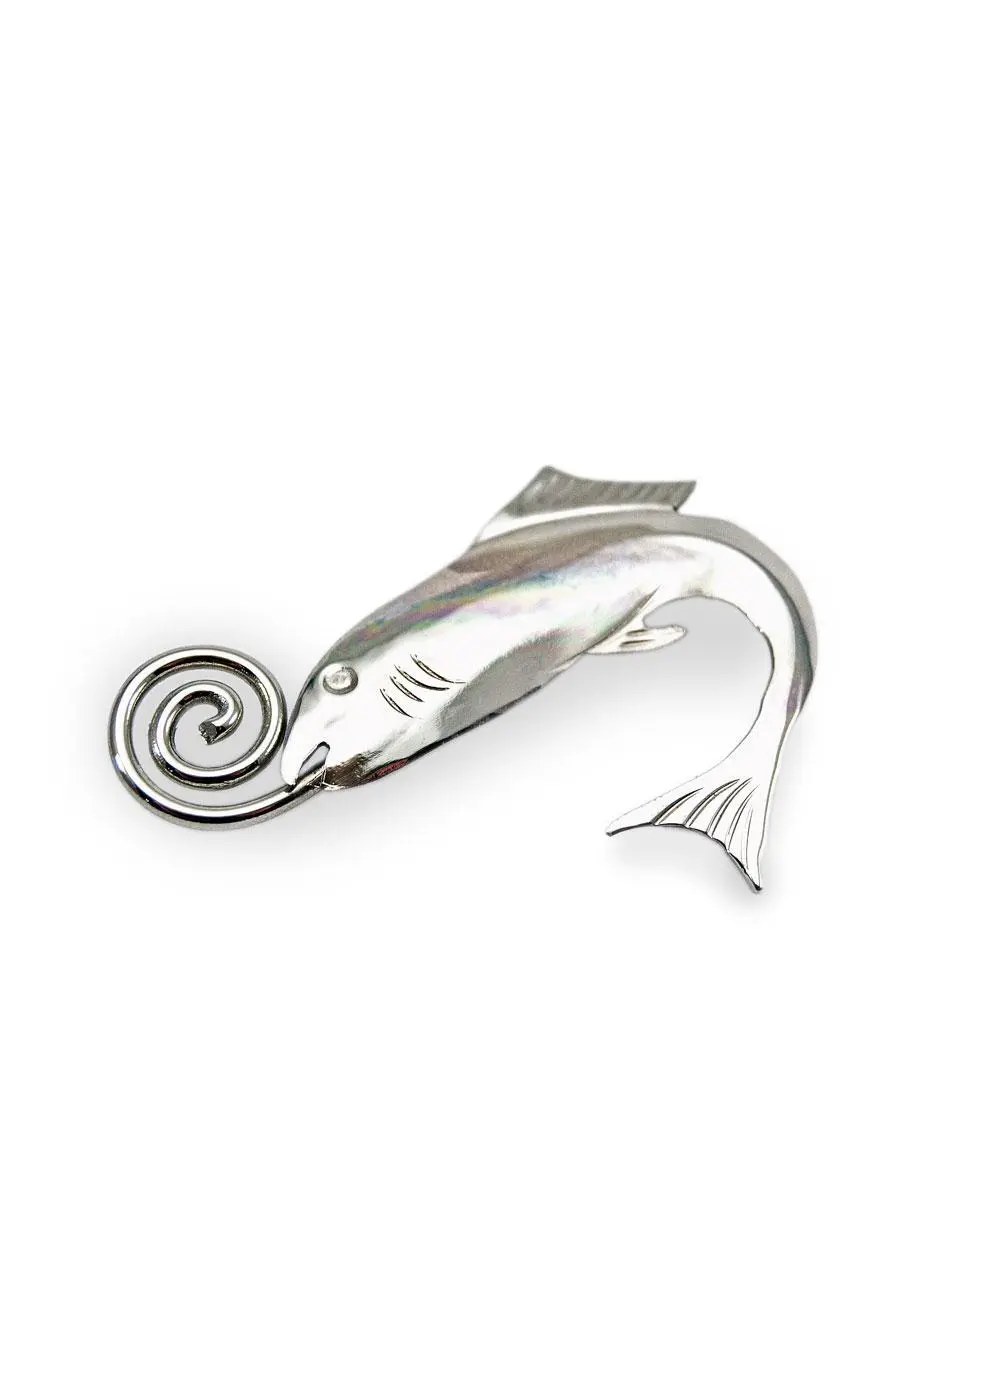 Salmon Of Knowledge Brooch